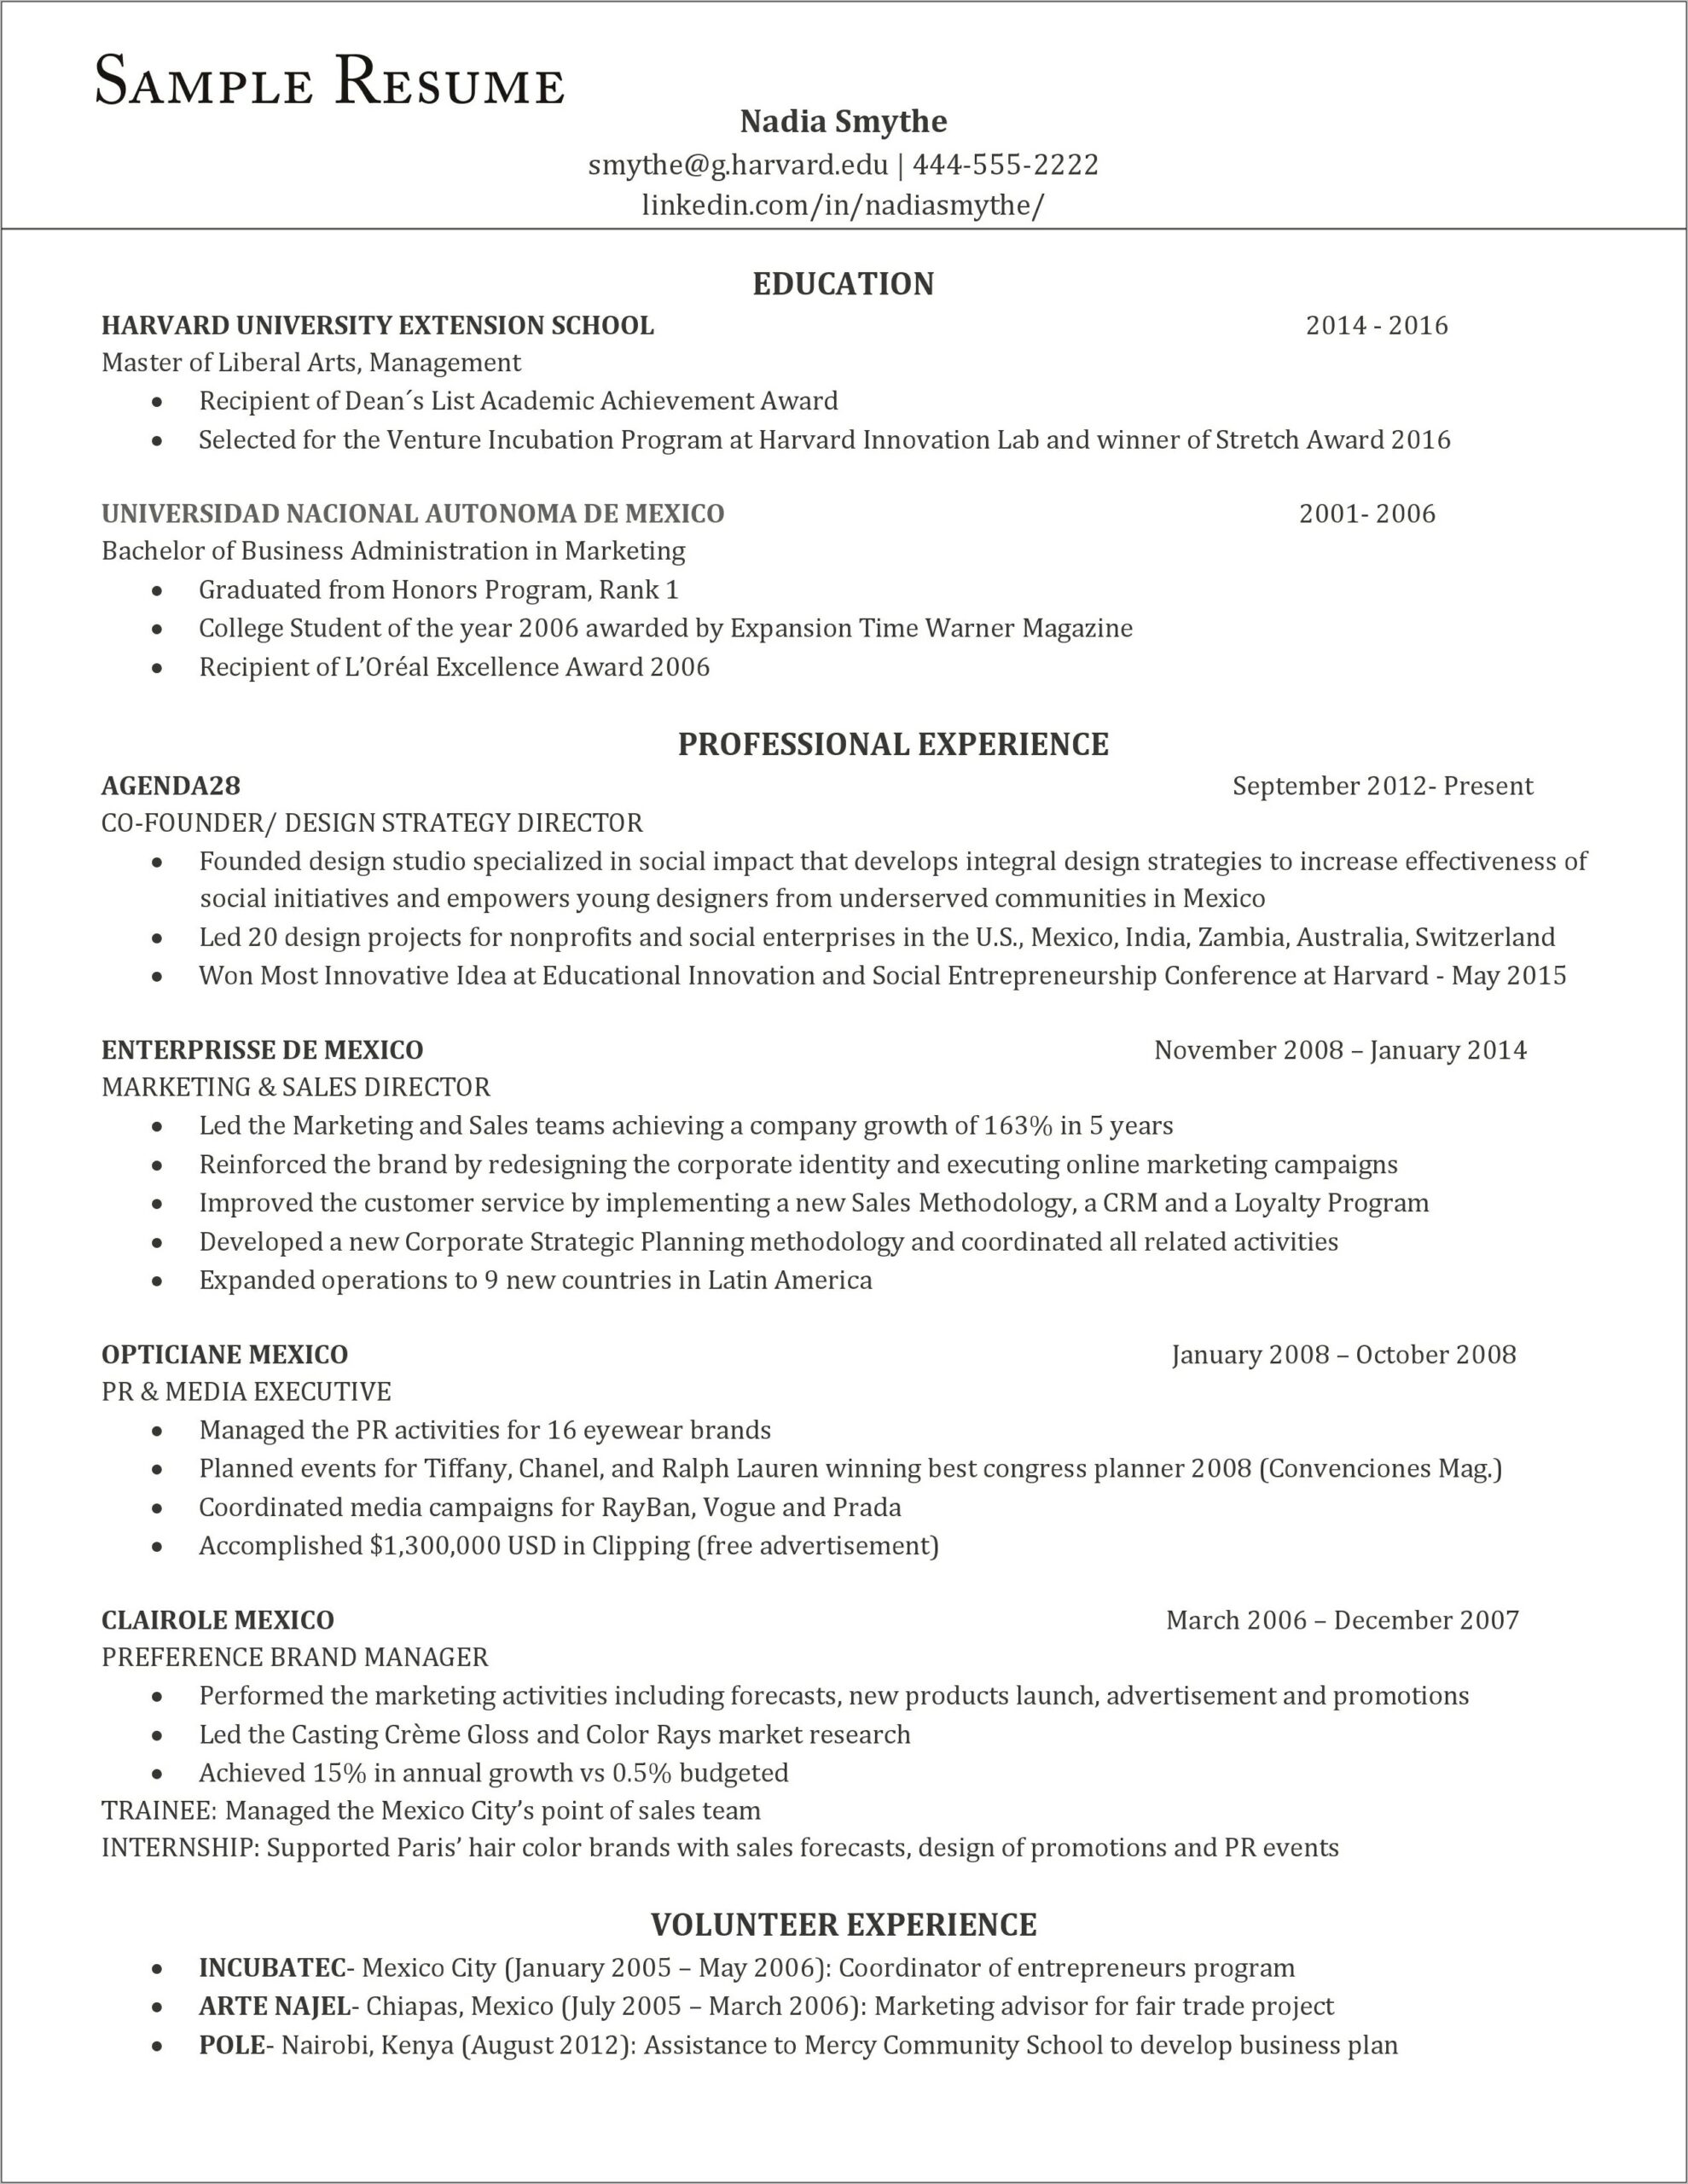 Do Job Resume Dates Have To Be Perfect